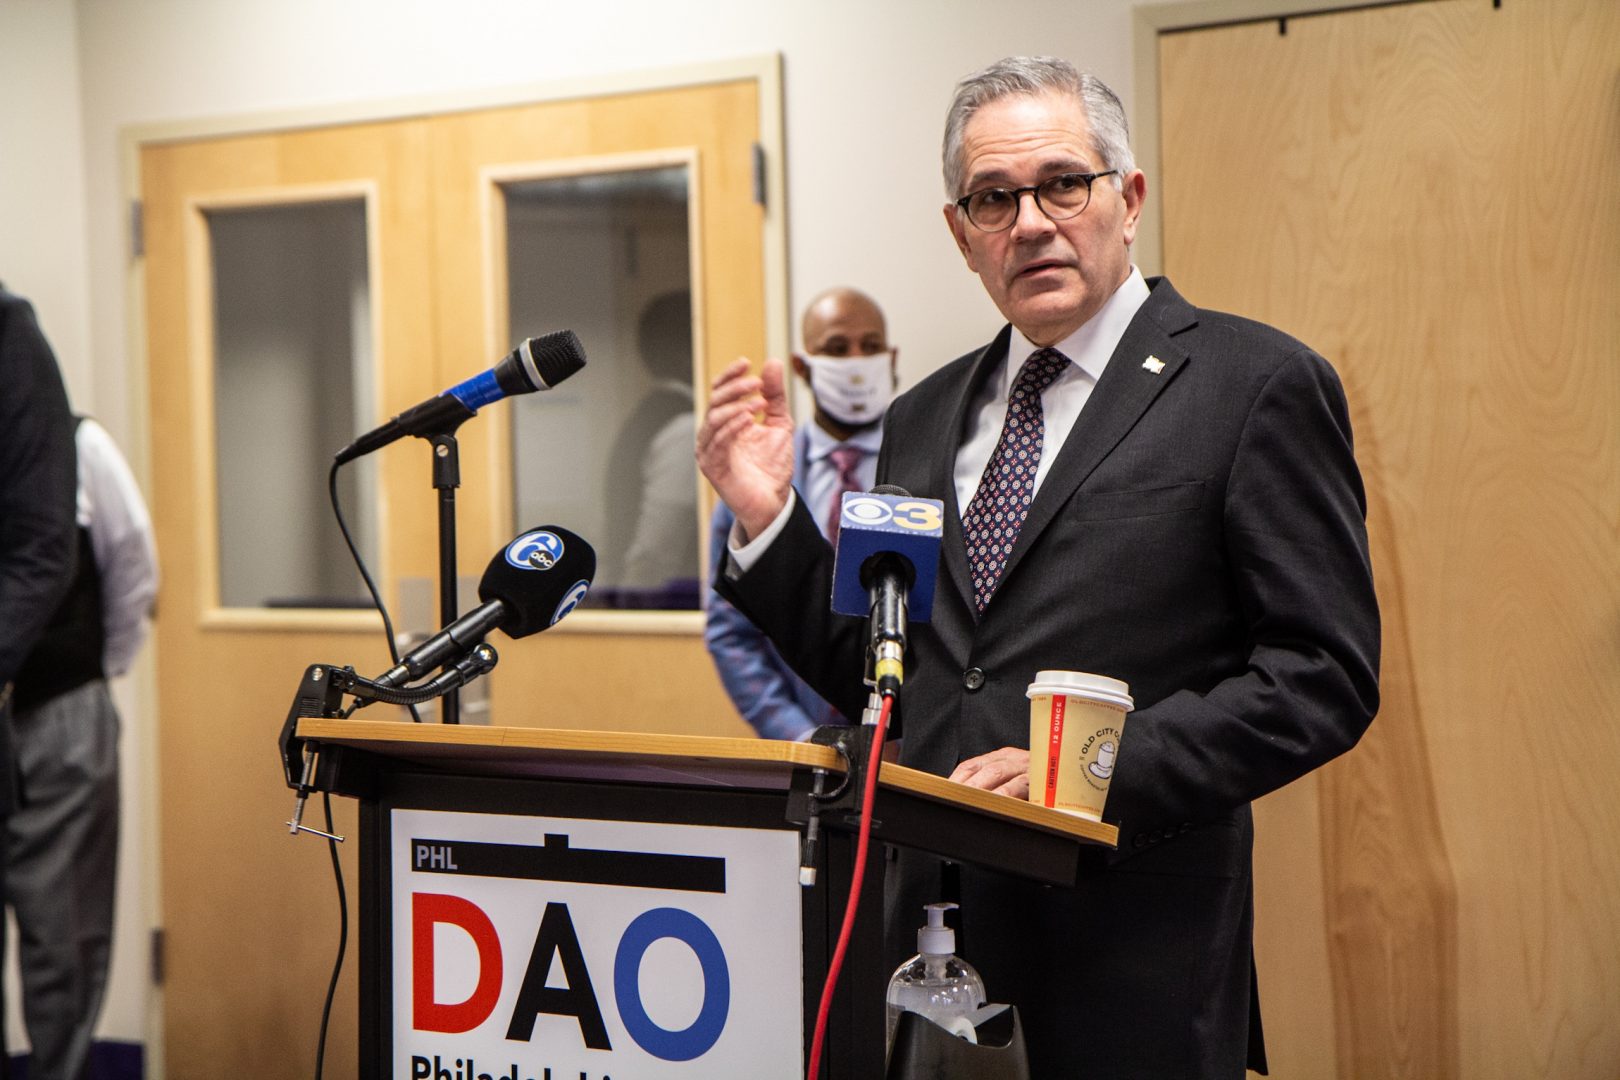 Philadelphia District Attorney Larry Krasner announced the formation of a new Anti-Discrimination Advisory Board with the Philadelphia District Attorney’s Office.